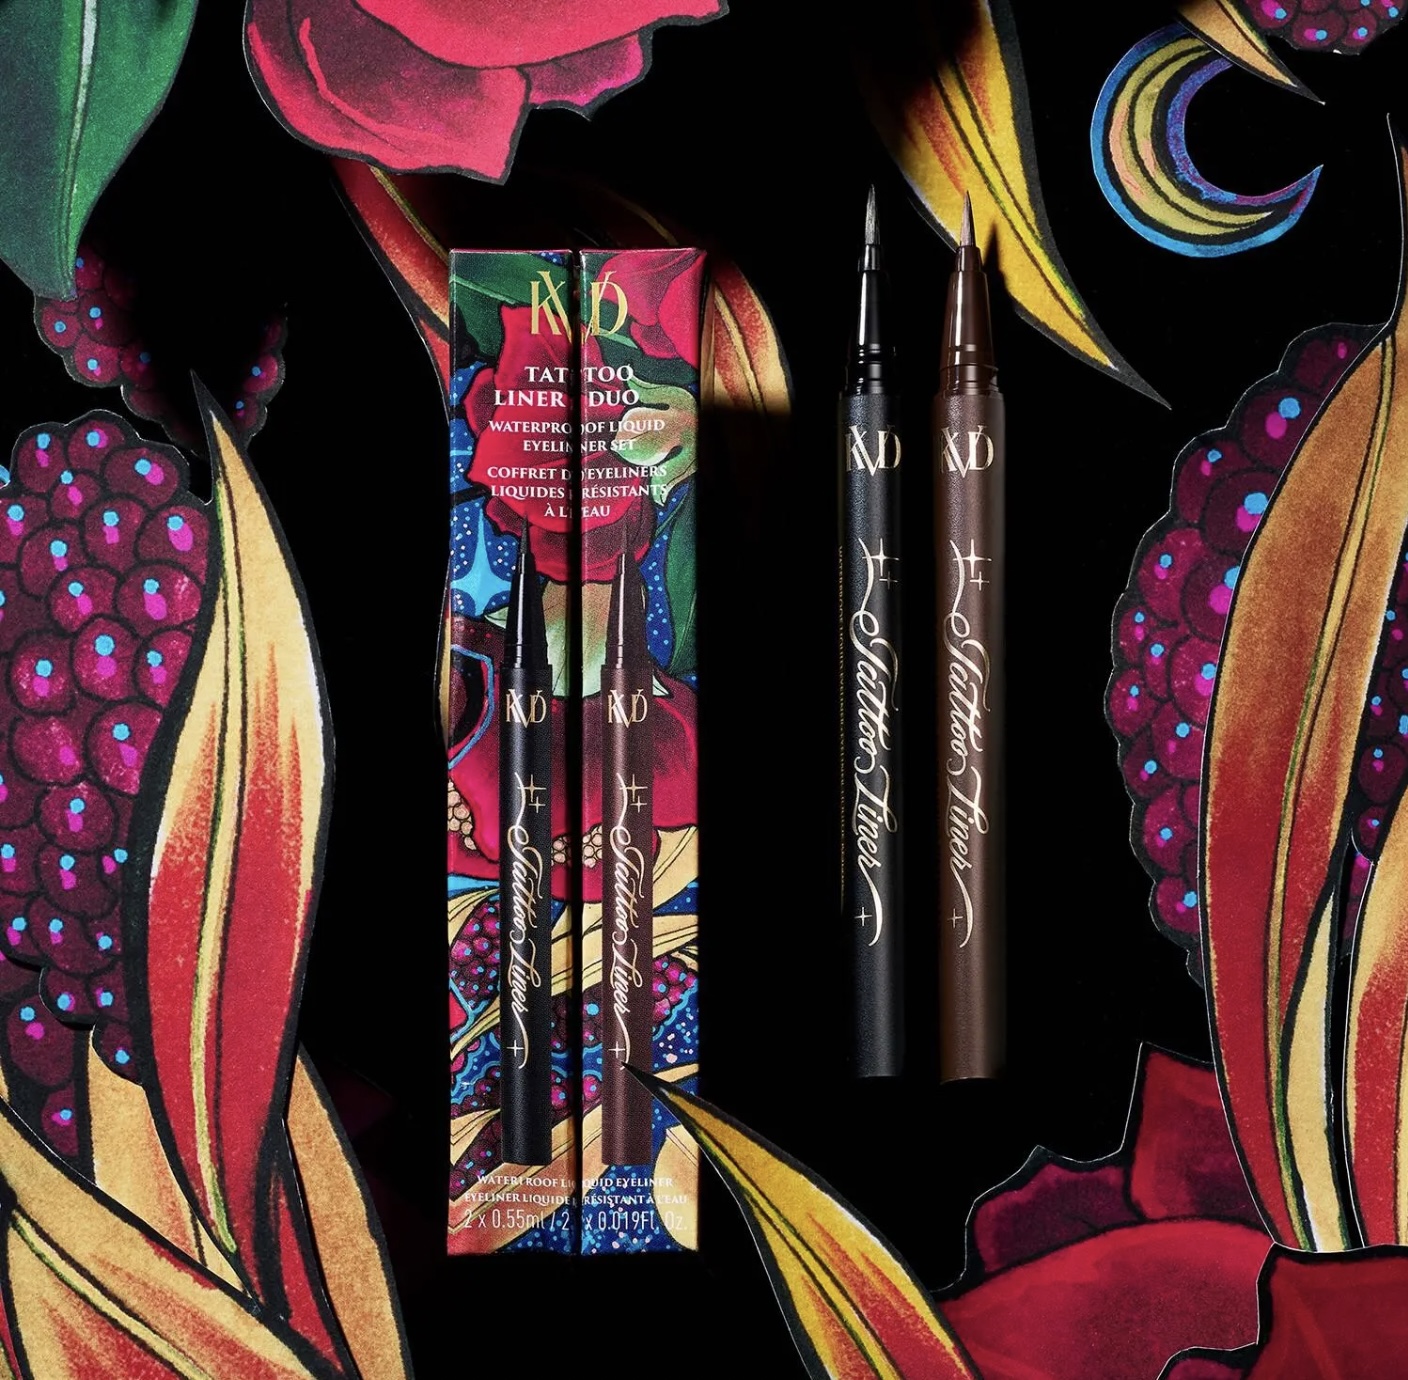 Collection Noël 2022 KVD Beauty Tattoo Liner Duo